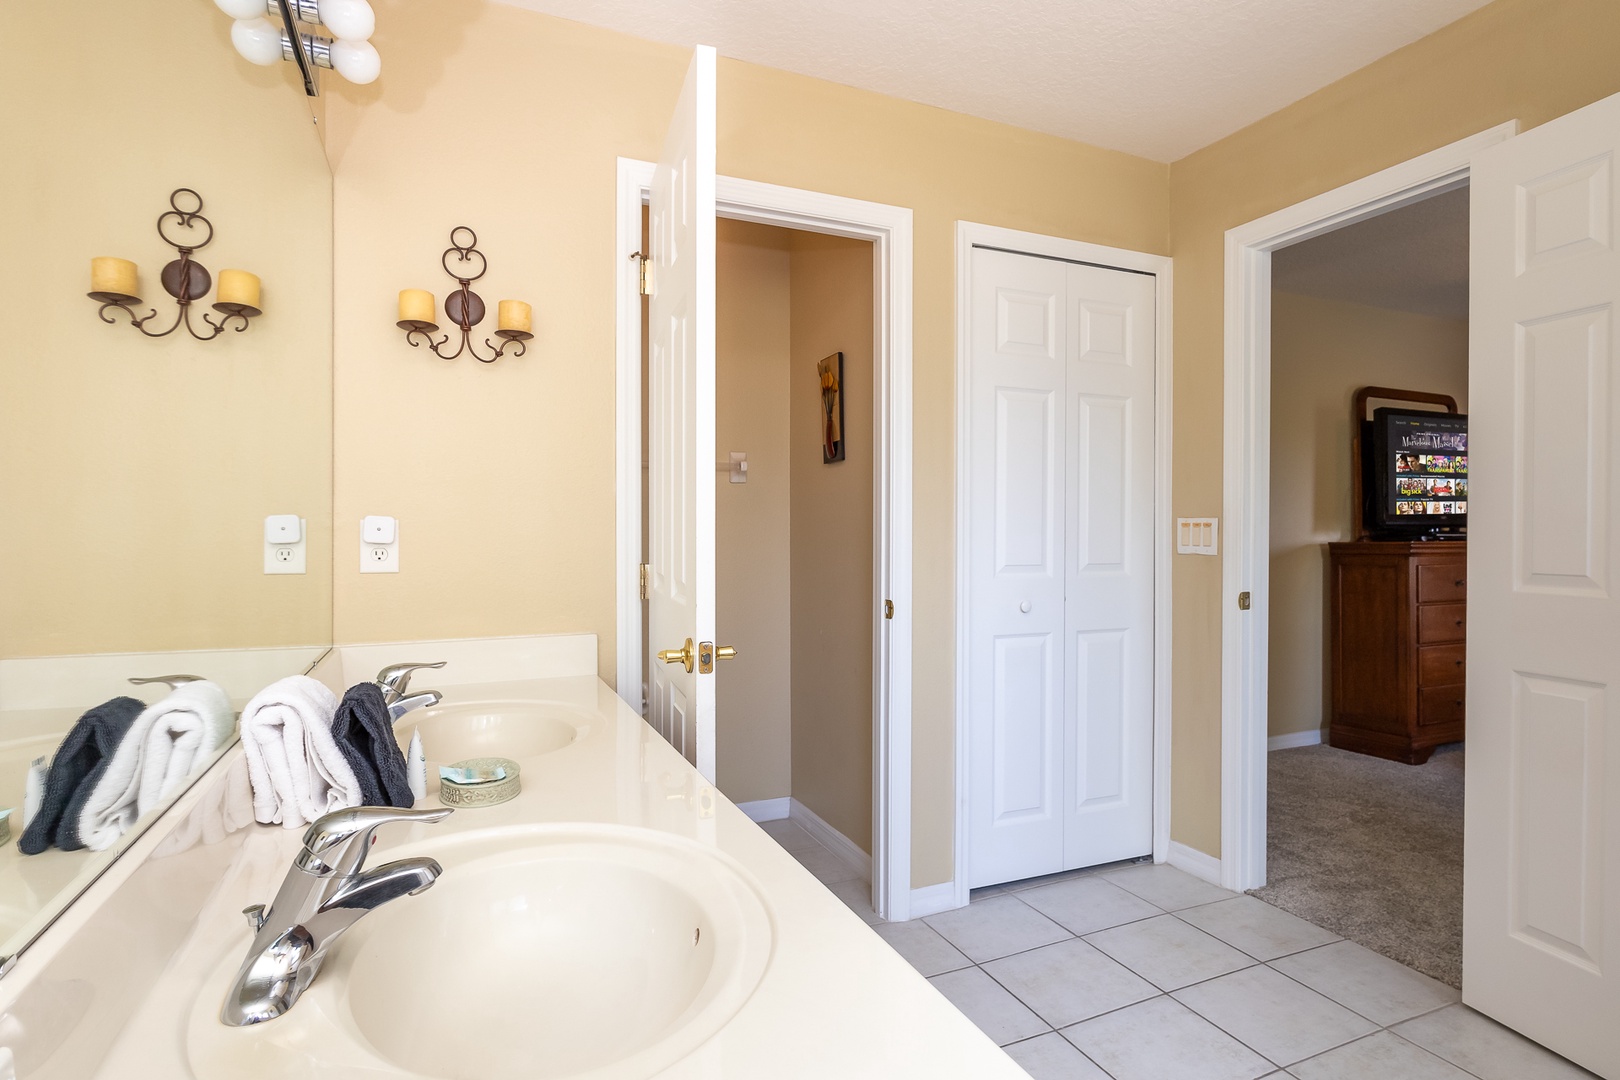 The king en suite offers a dual vanity, glass shower, & soaking tub